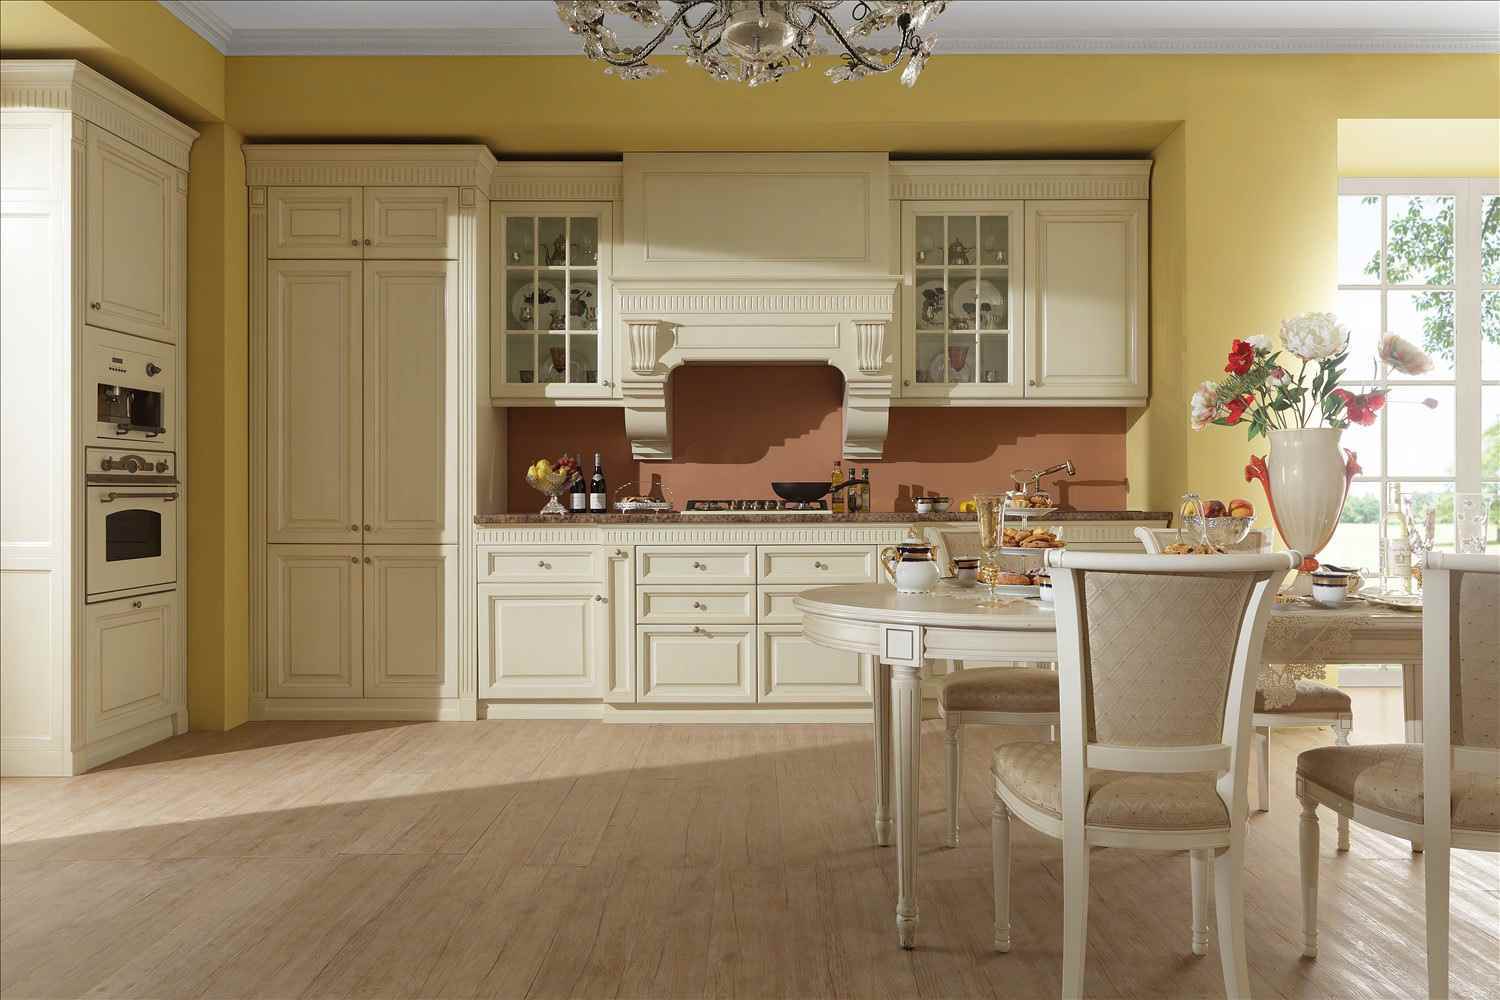 an example of a beautiful kitchen style in a classic style